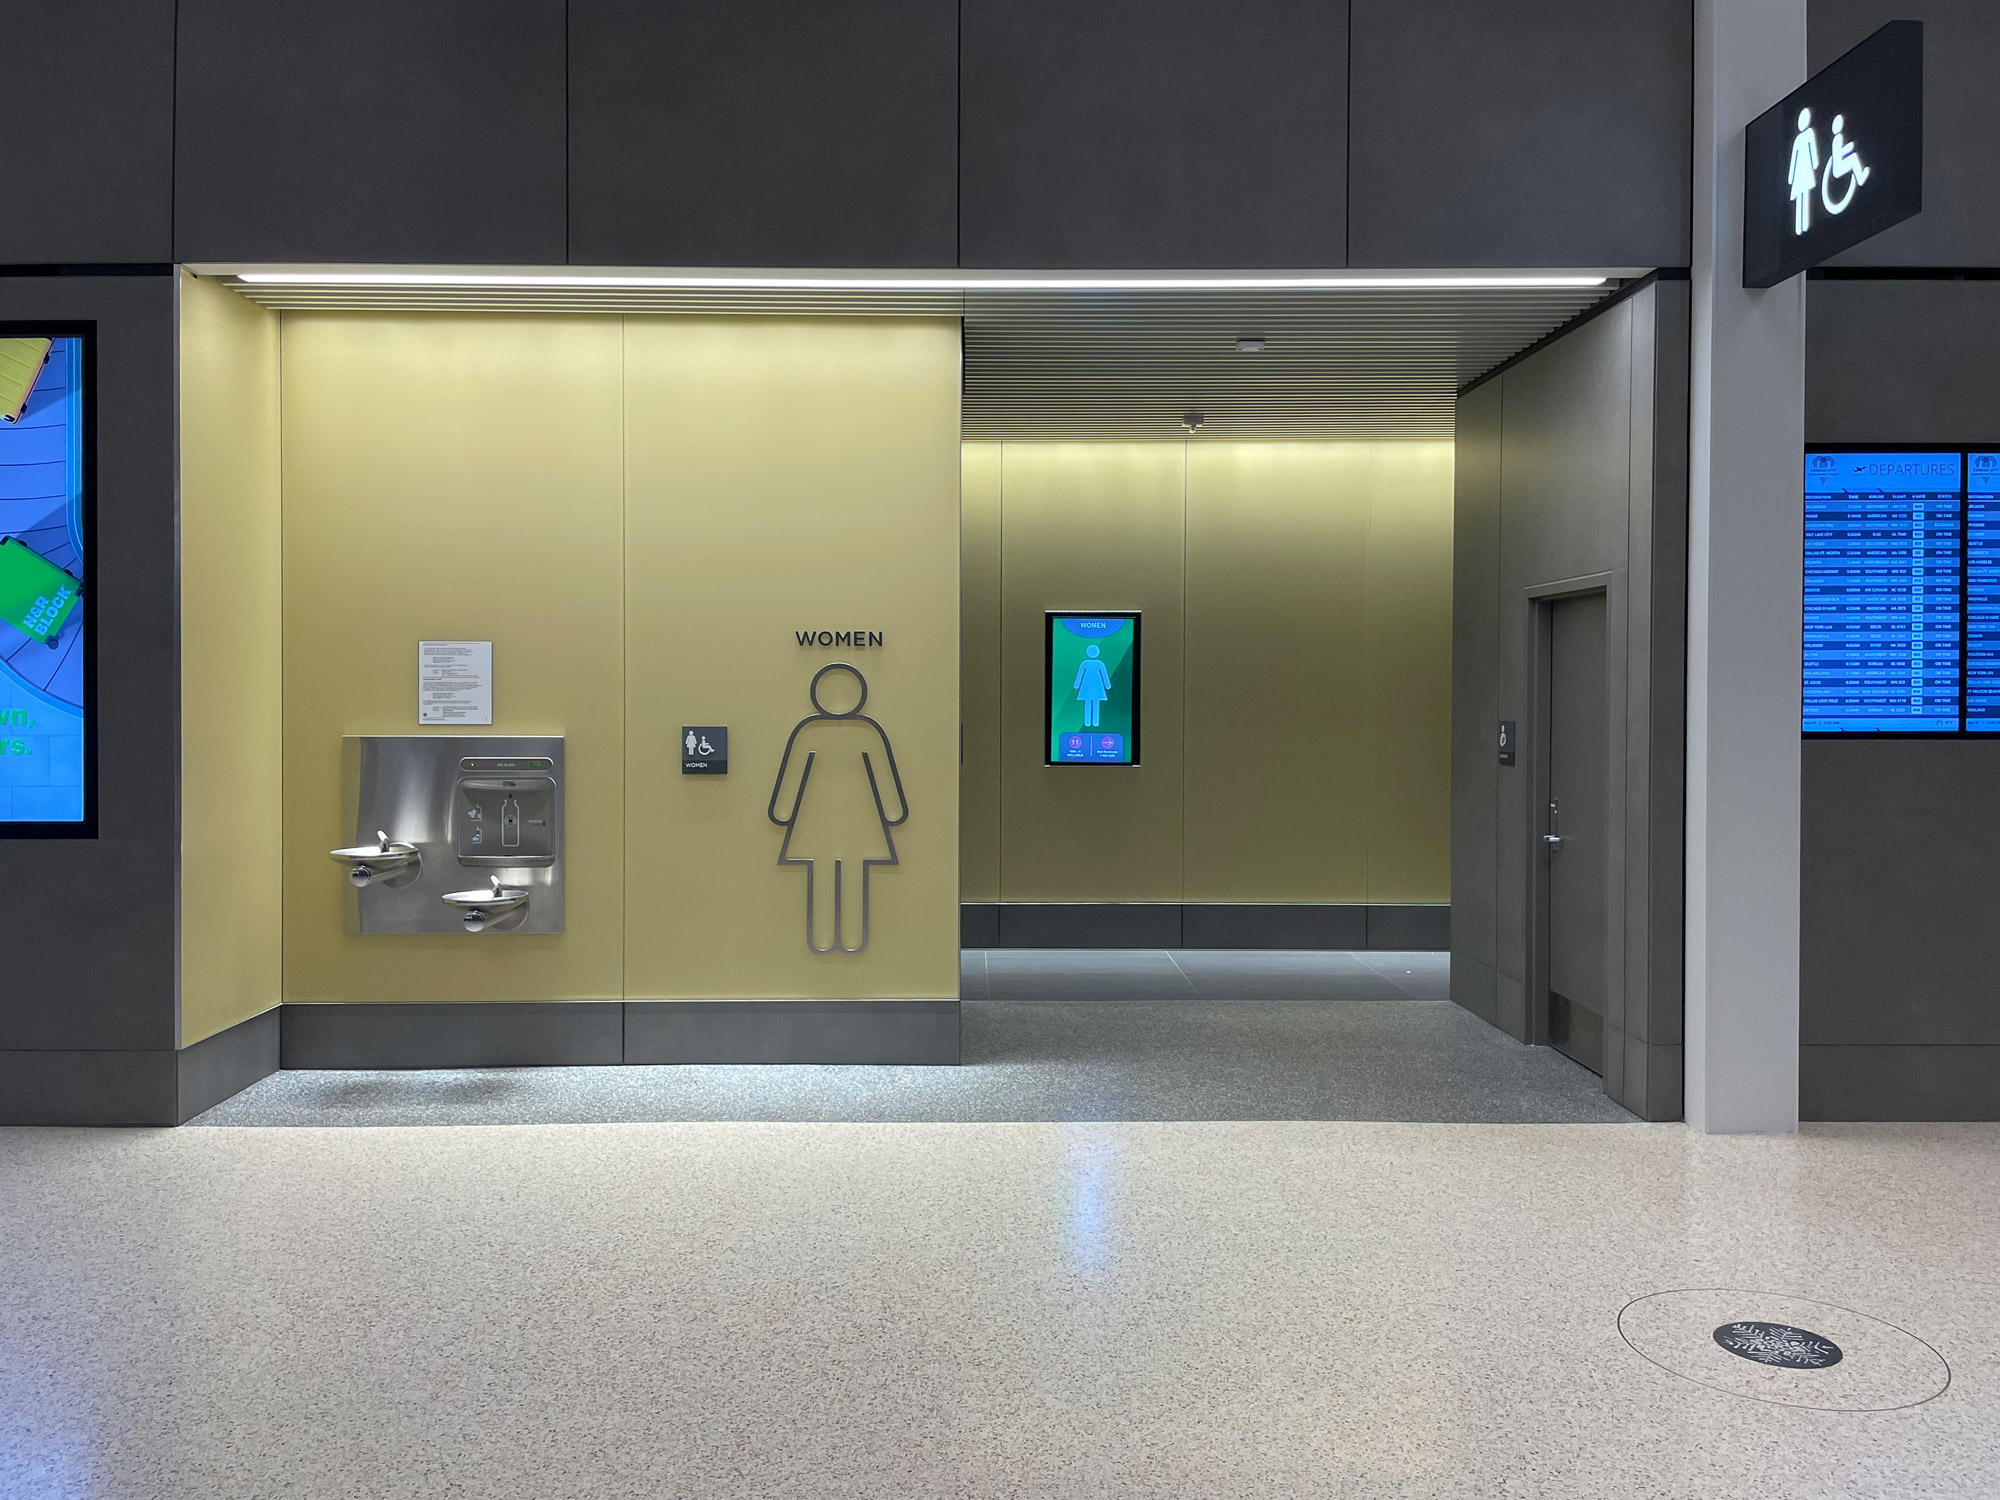 Bathroom entrance at KCI Airport with Bendheim glass.